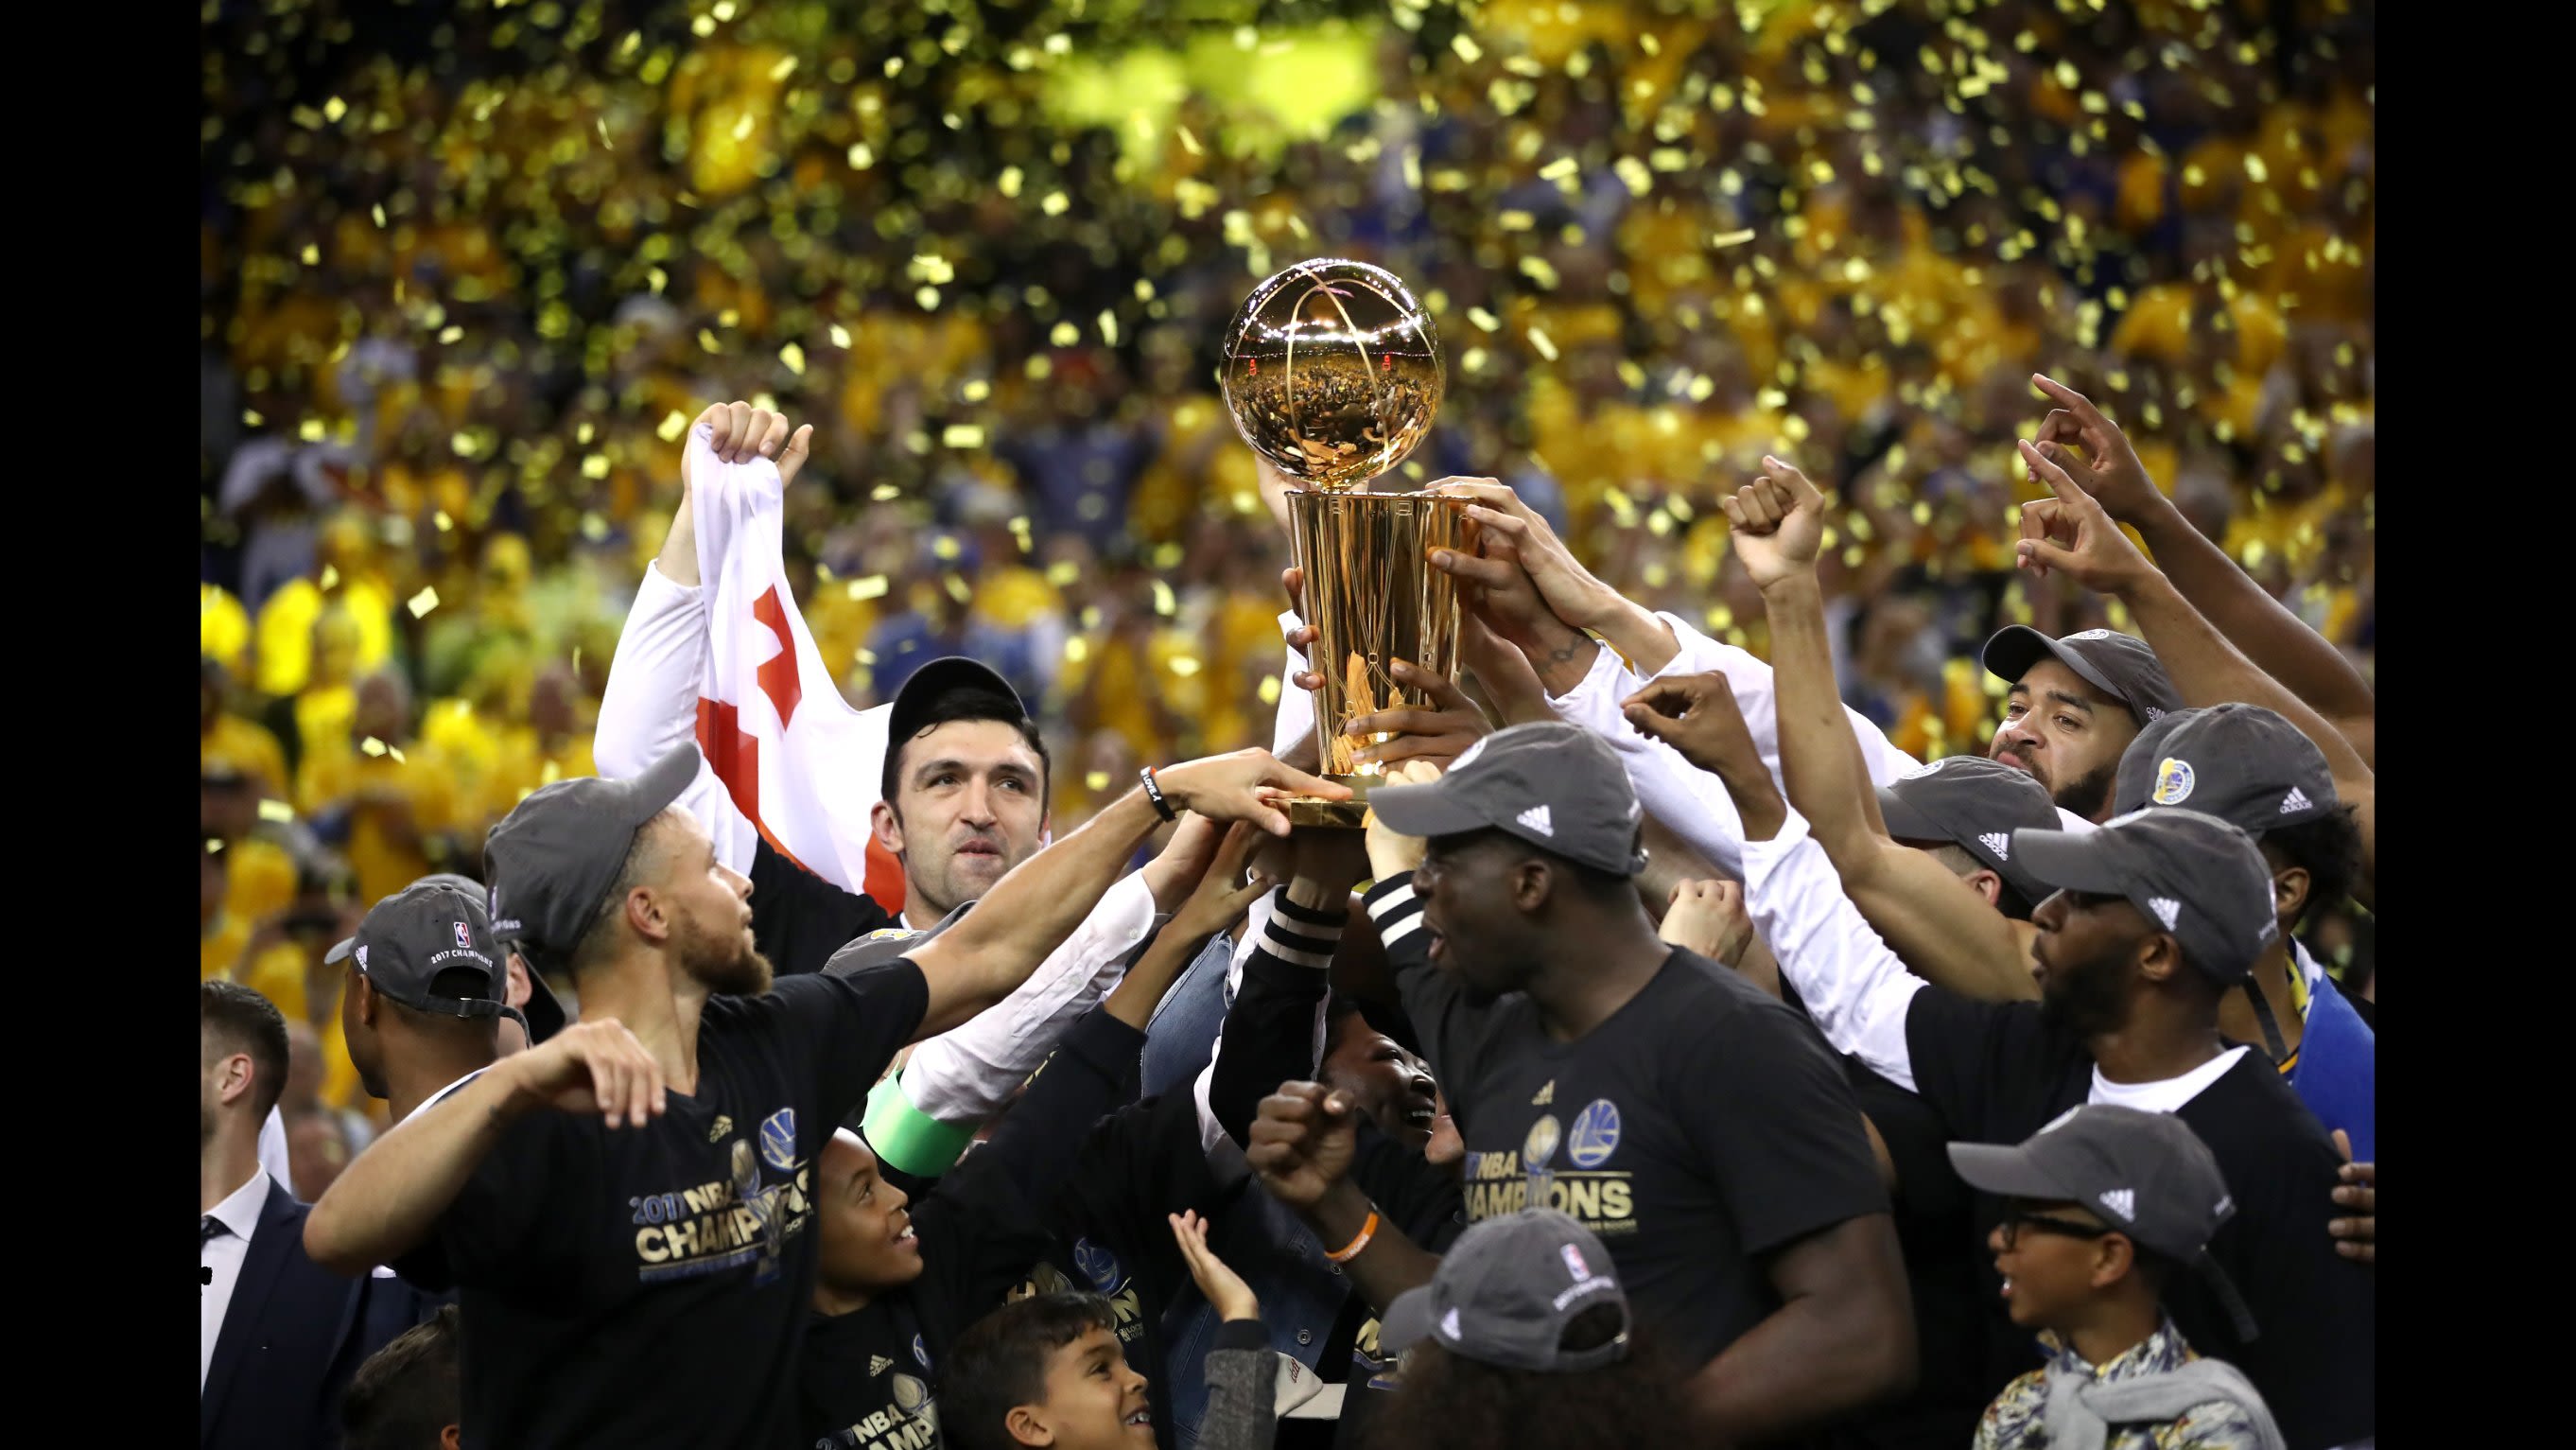 Domineering Warriors Going For 2nd Straight NBA Championship Title